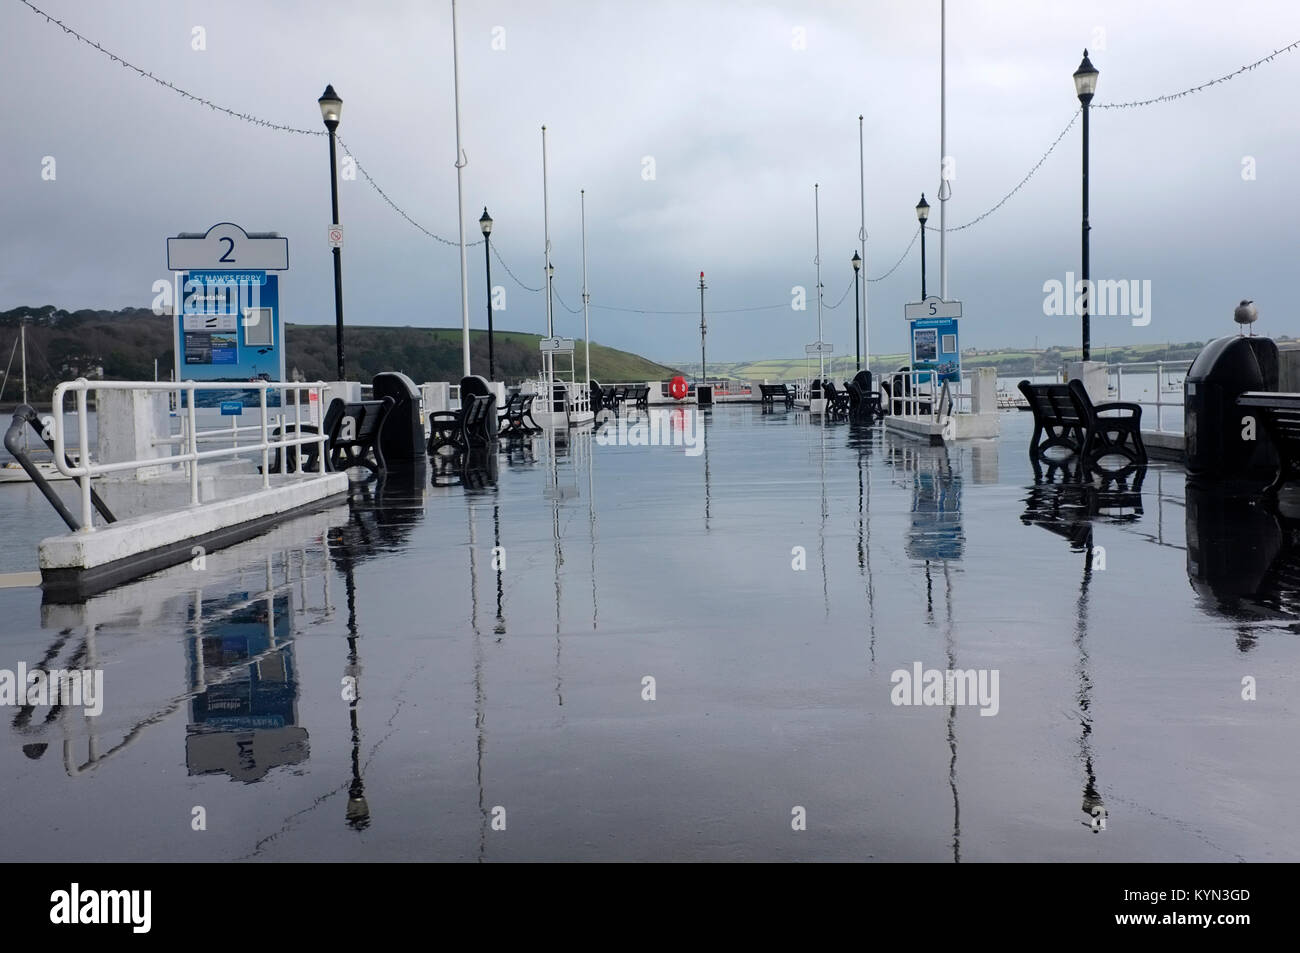 A wet day on the pier in Falmouth, Cornwall Stock Photo